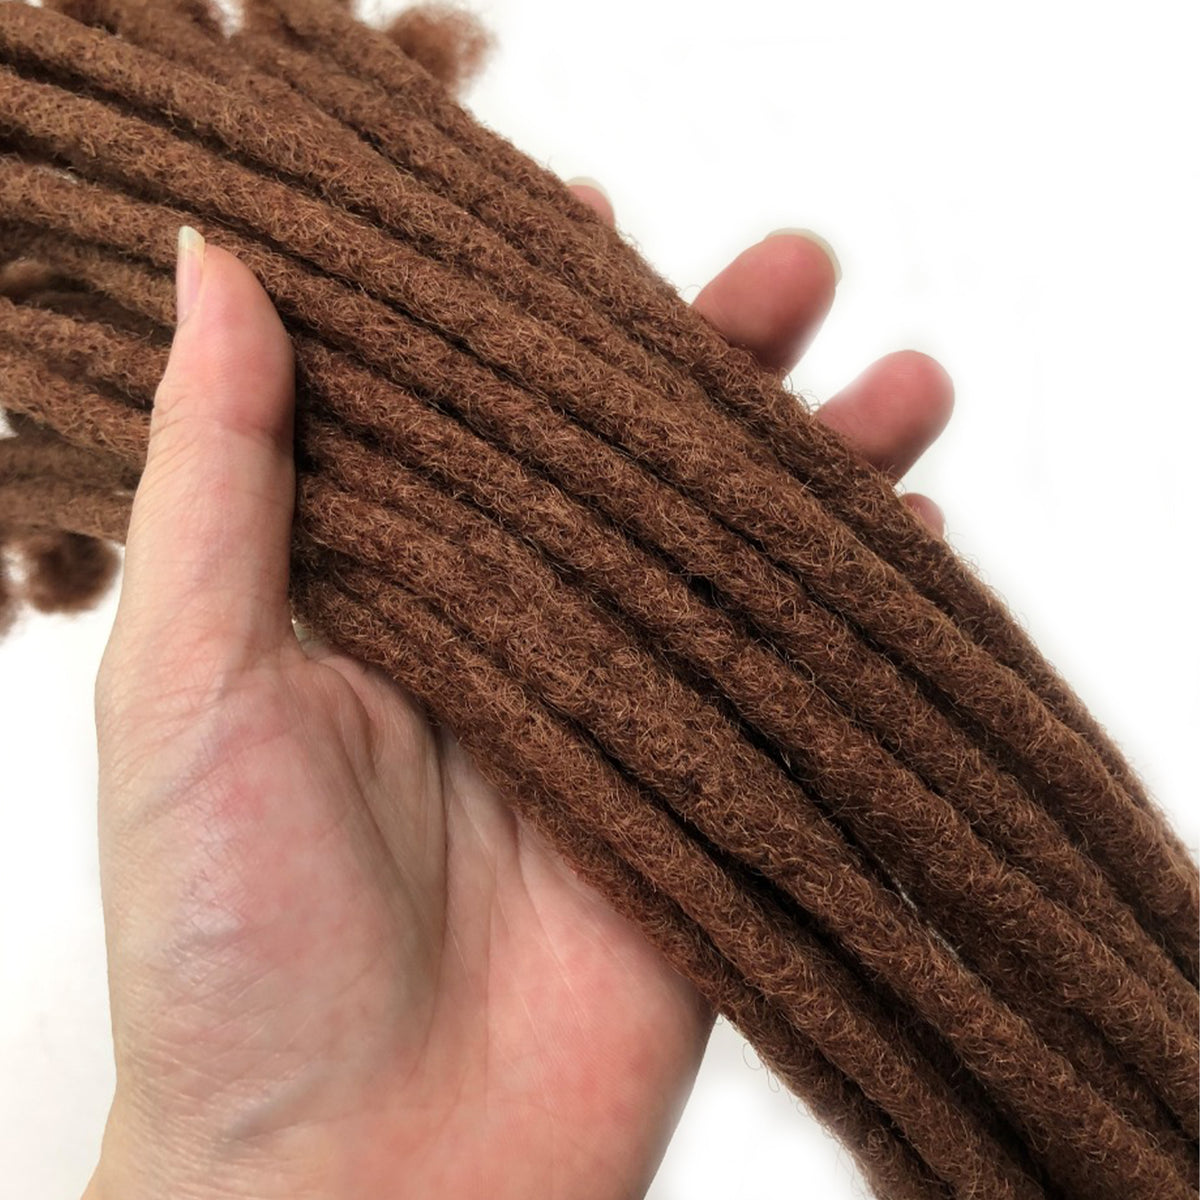 100% Human Hair Dreadlock Extensions 16Inch 10 Strands Handmade Natural Loc Extensions Human Hair Bundle Dreads Extensions For Woman & Men Can Be Dyed/Bleached (Brown/33, 16inch length 0.4 cm Width)